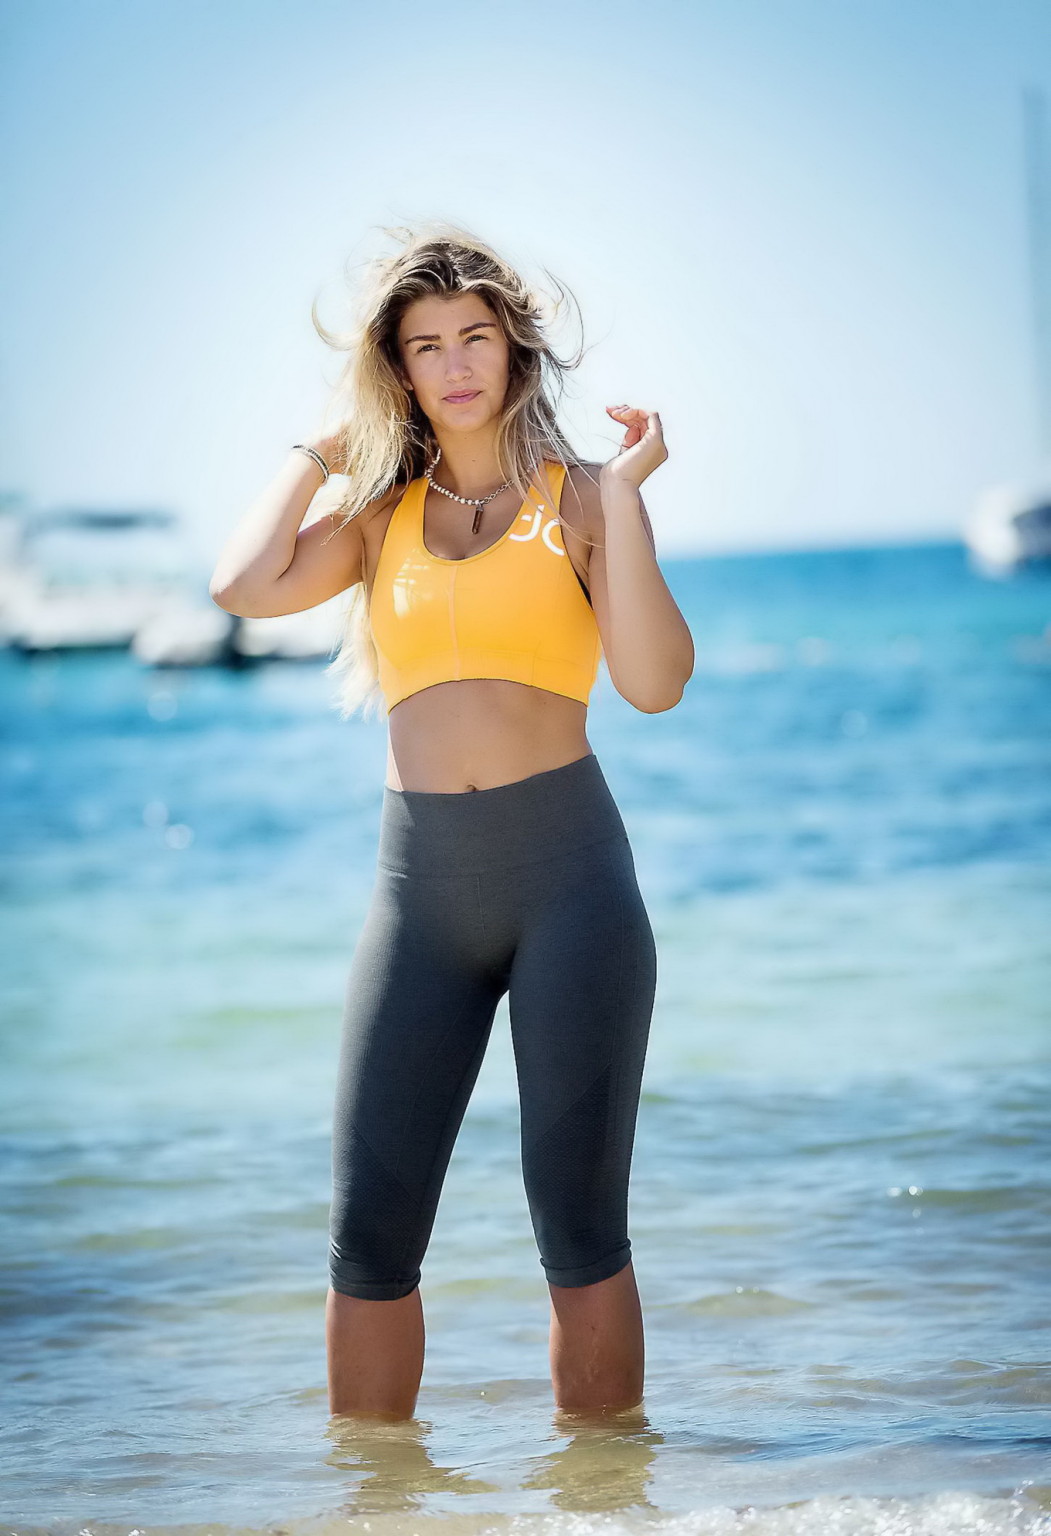 Amy Willerton busty in sports bra and leggings #75159840